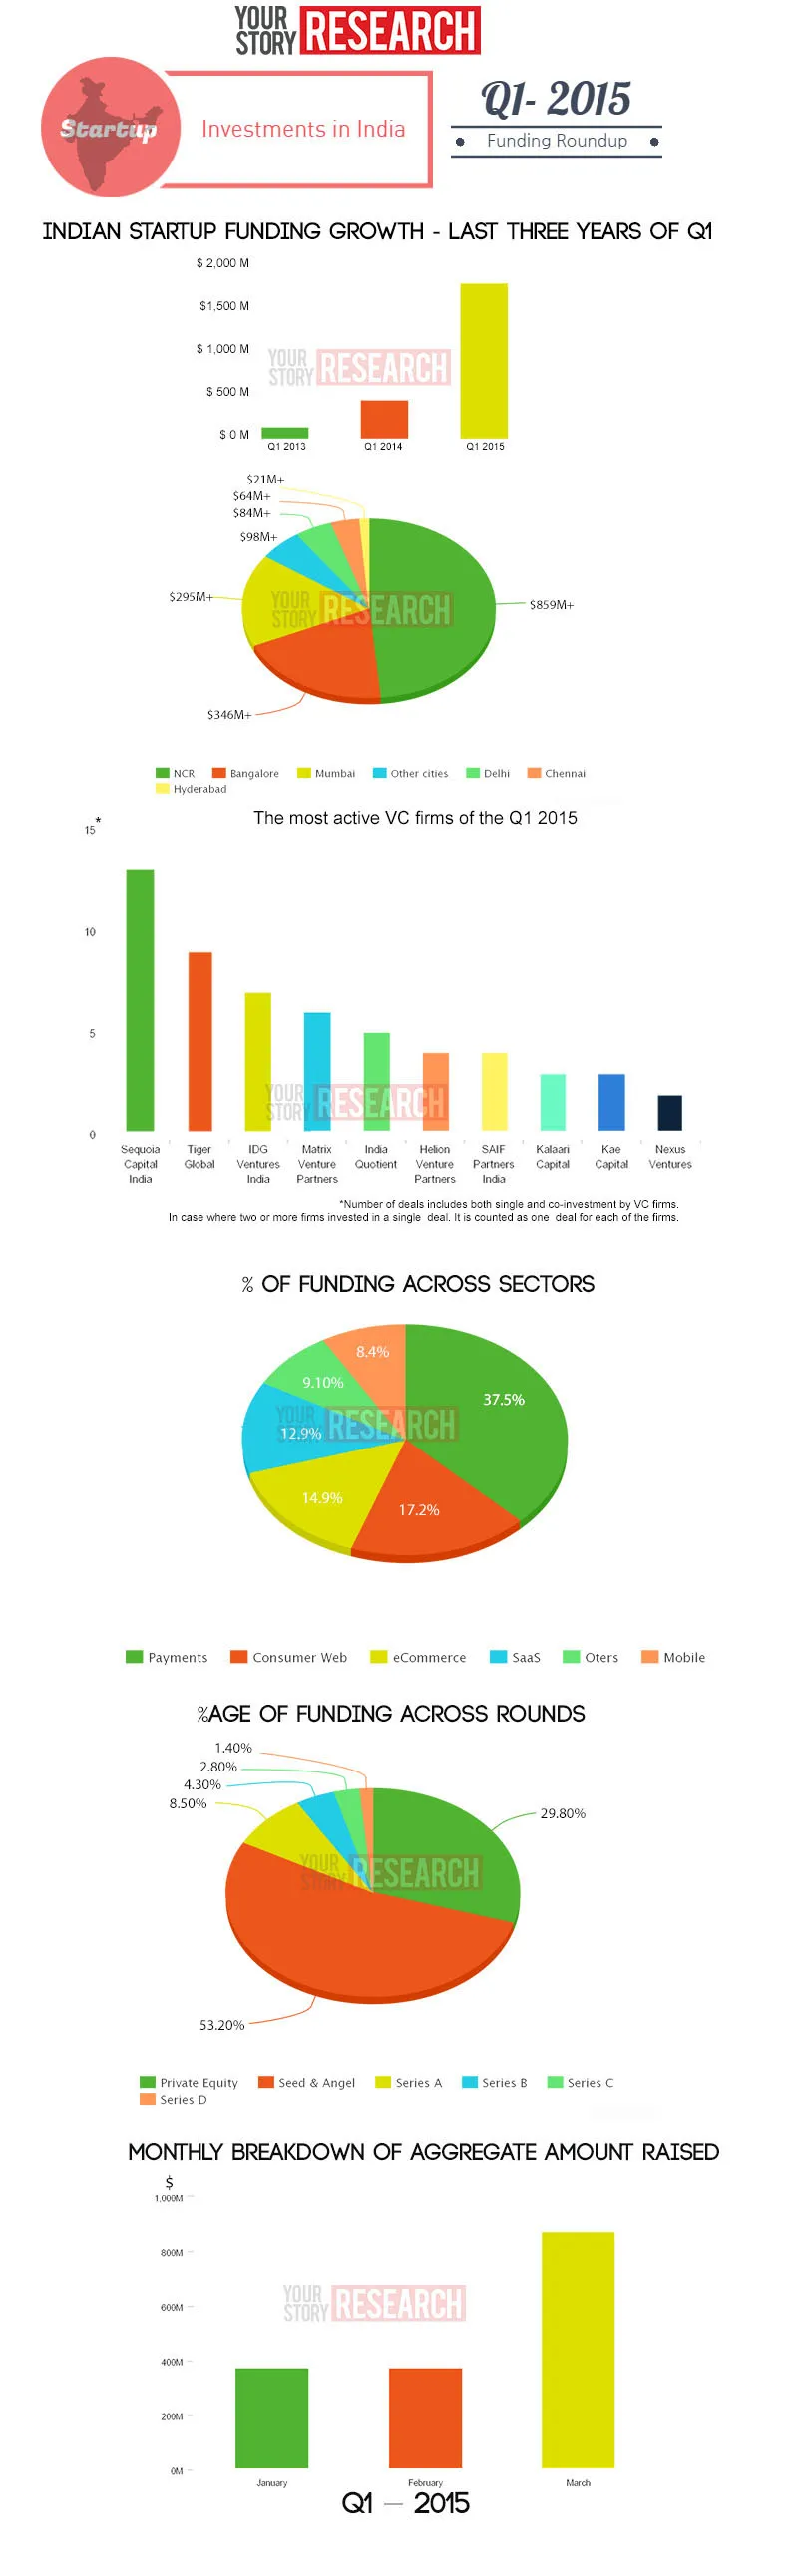 Q1 2015_Indian_Startup_Funding_YourStory Research